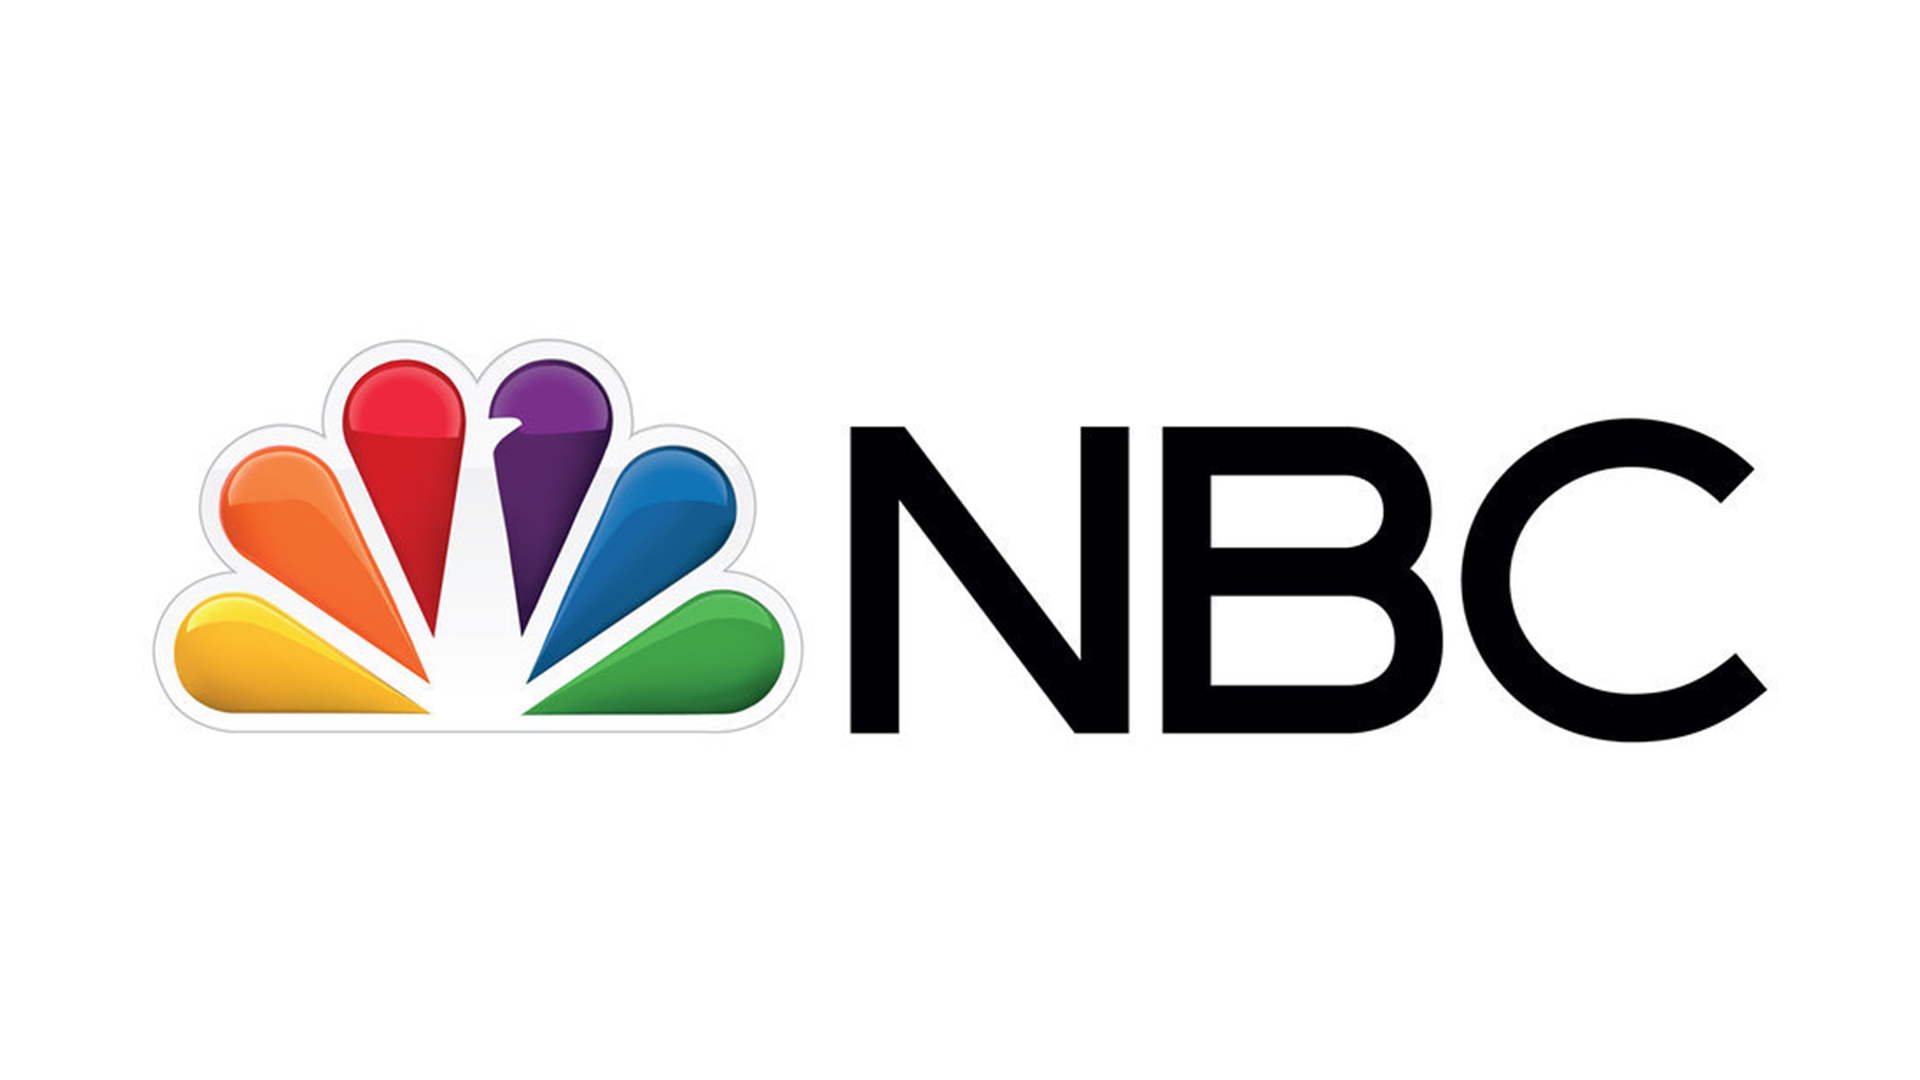 Nbc Midseason Schedule 2022 Nbc Shares 2021-2022 Schedule | Broadcasting+Cable